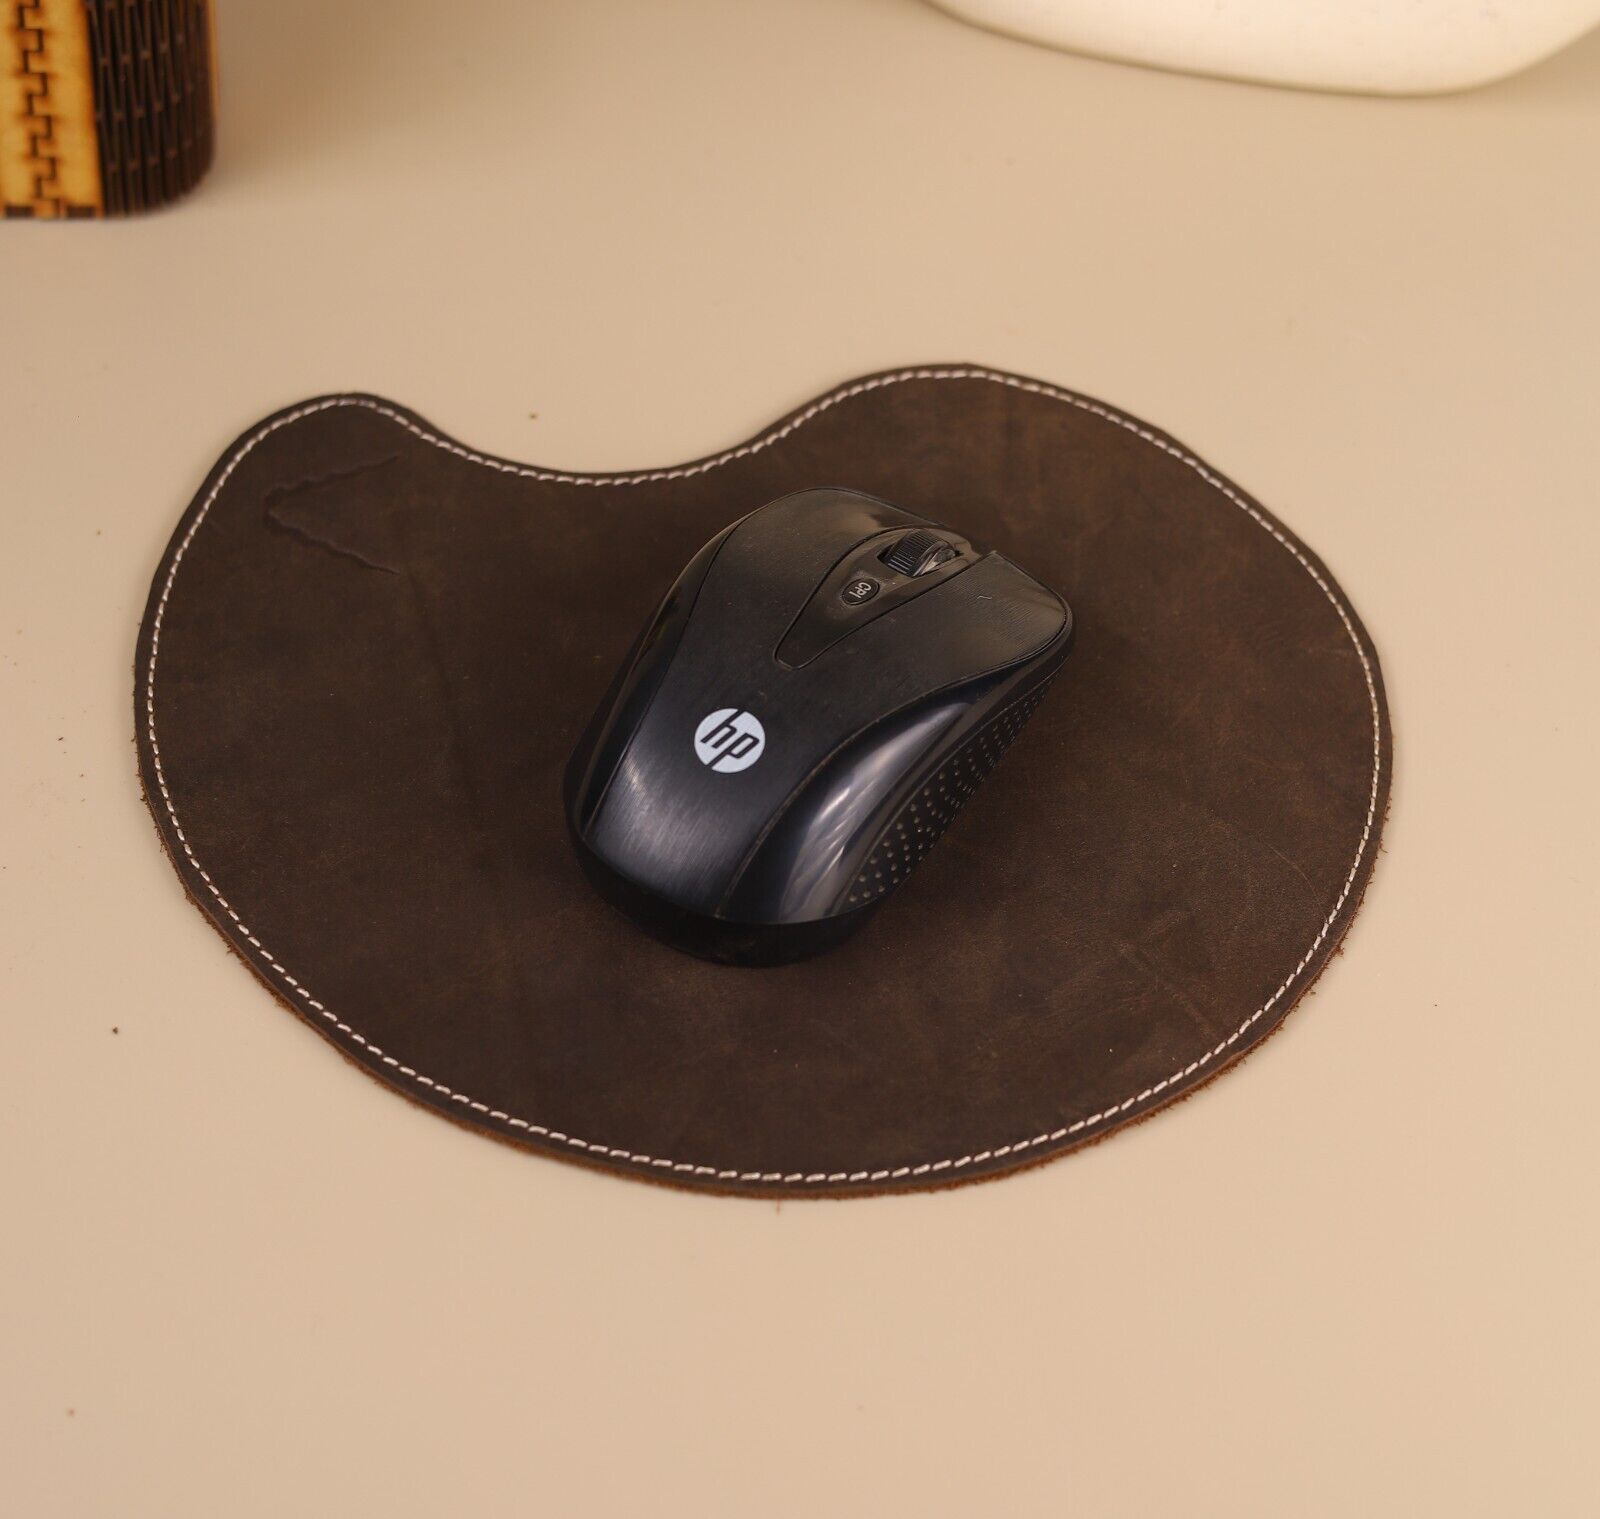 Personalized Leather Mouse Pad - Top Grain Mat for Desk